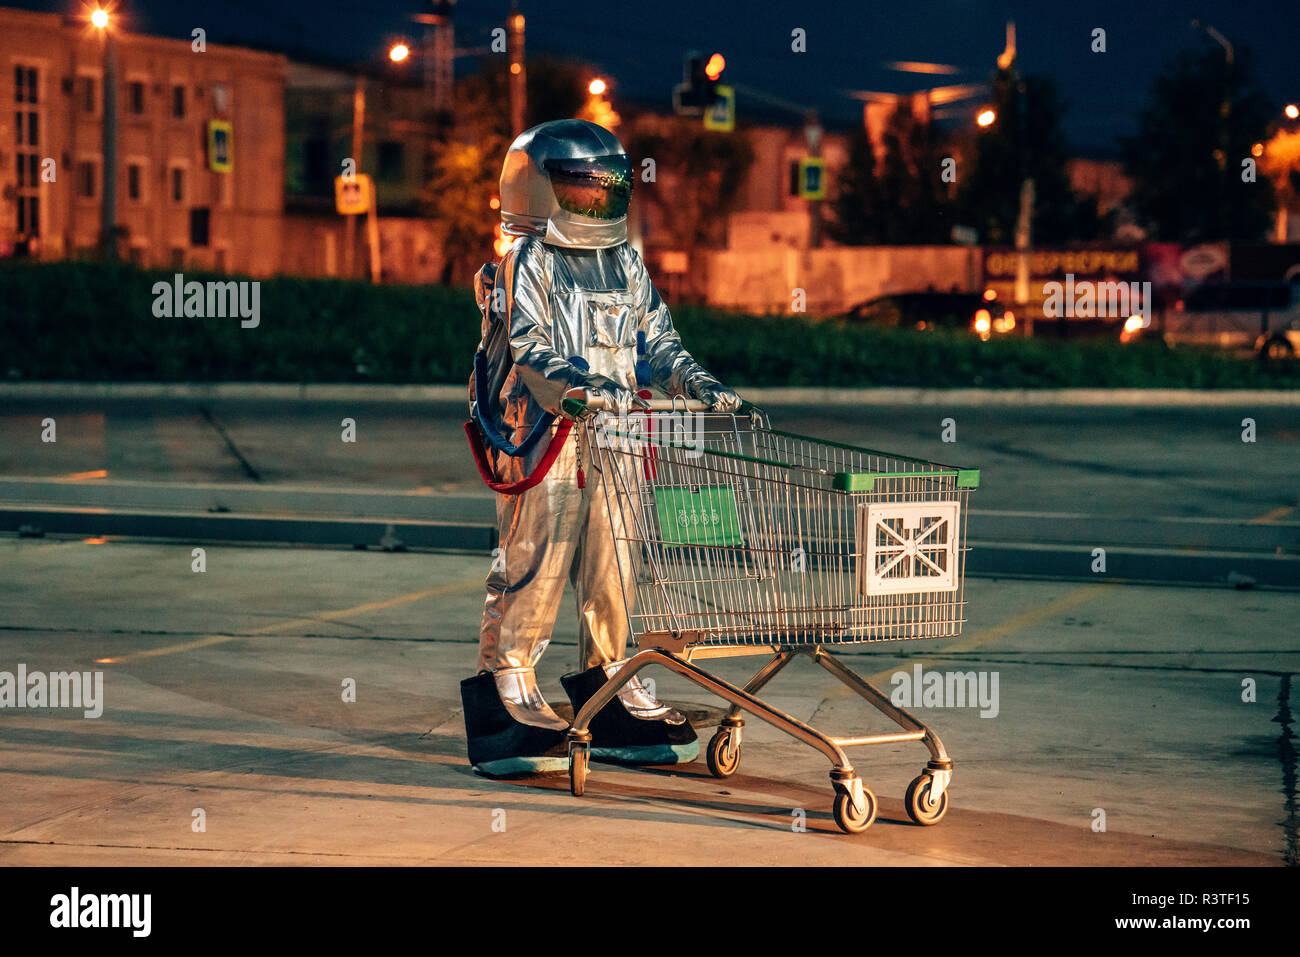 Spaceman in the city at night on parking lot with shopping cart Stock Photo